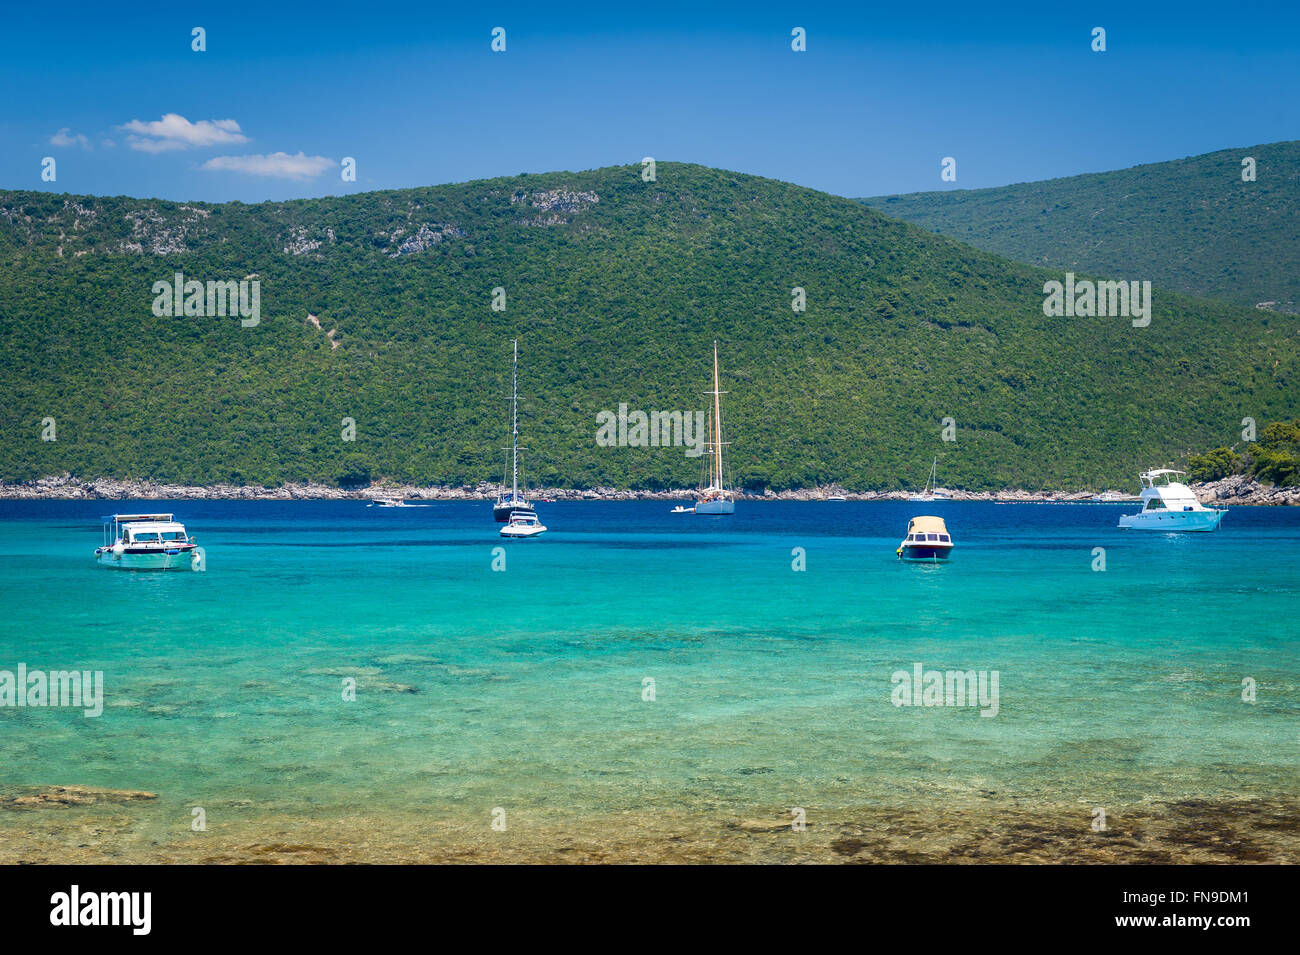 Recreational boats and yachts at anchor in a beautiful calm bay with dreamy water Stock Photo